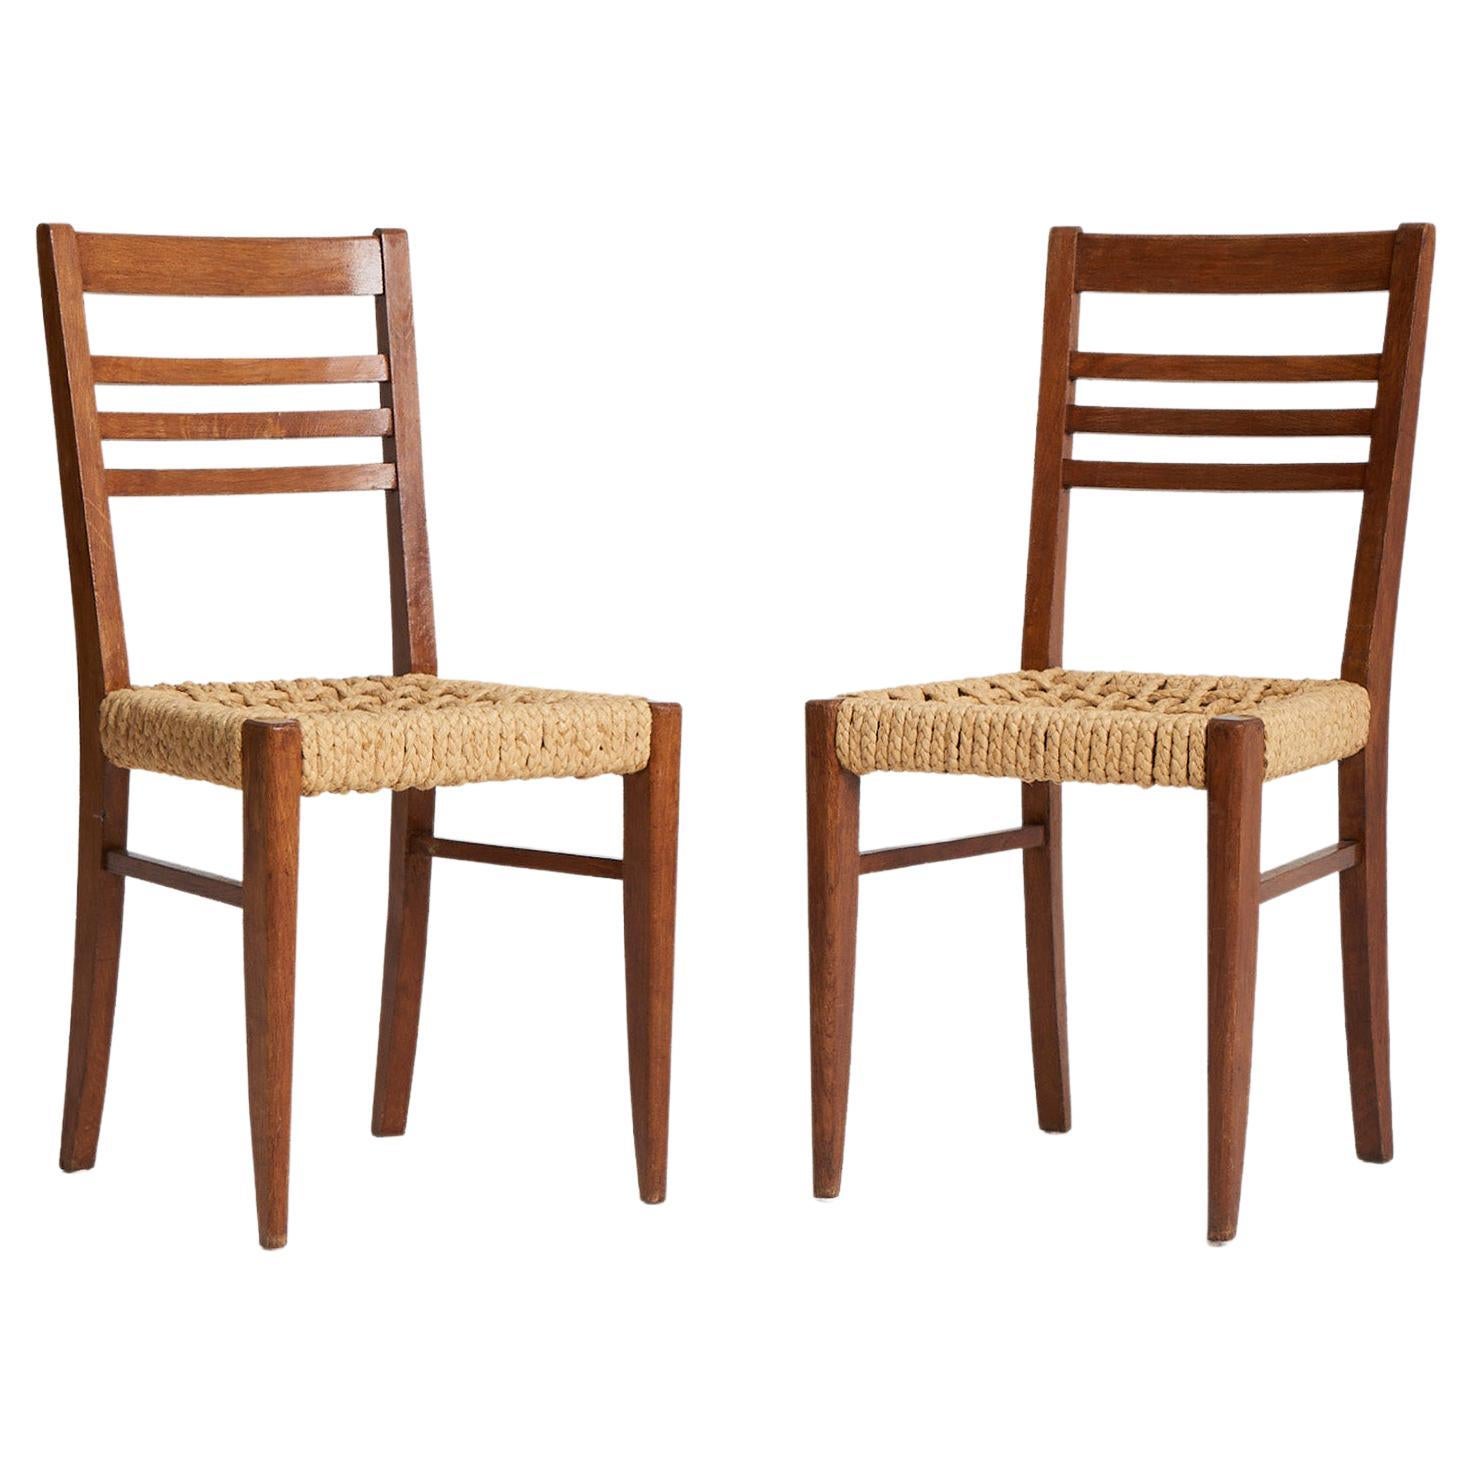 Pair of Chairs by Audoux Minet